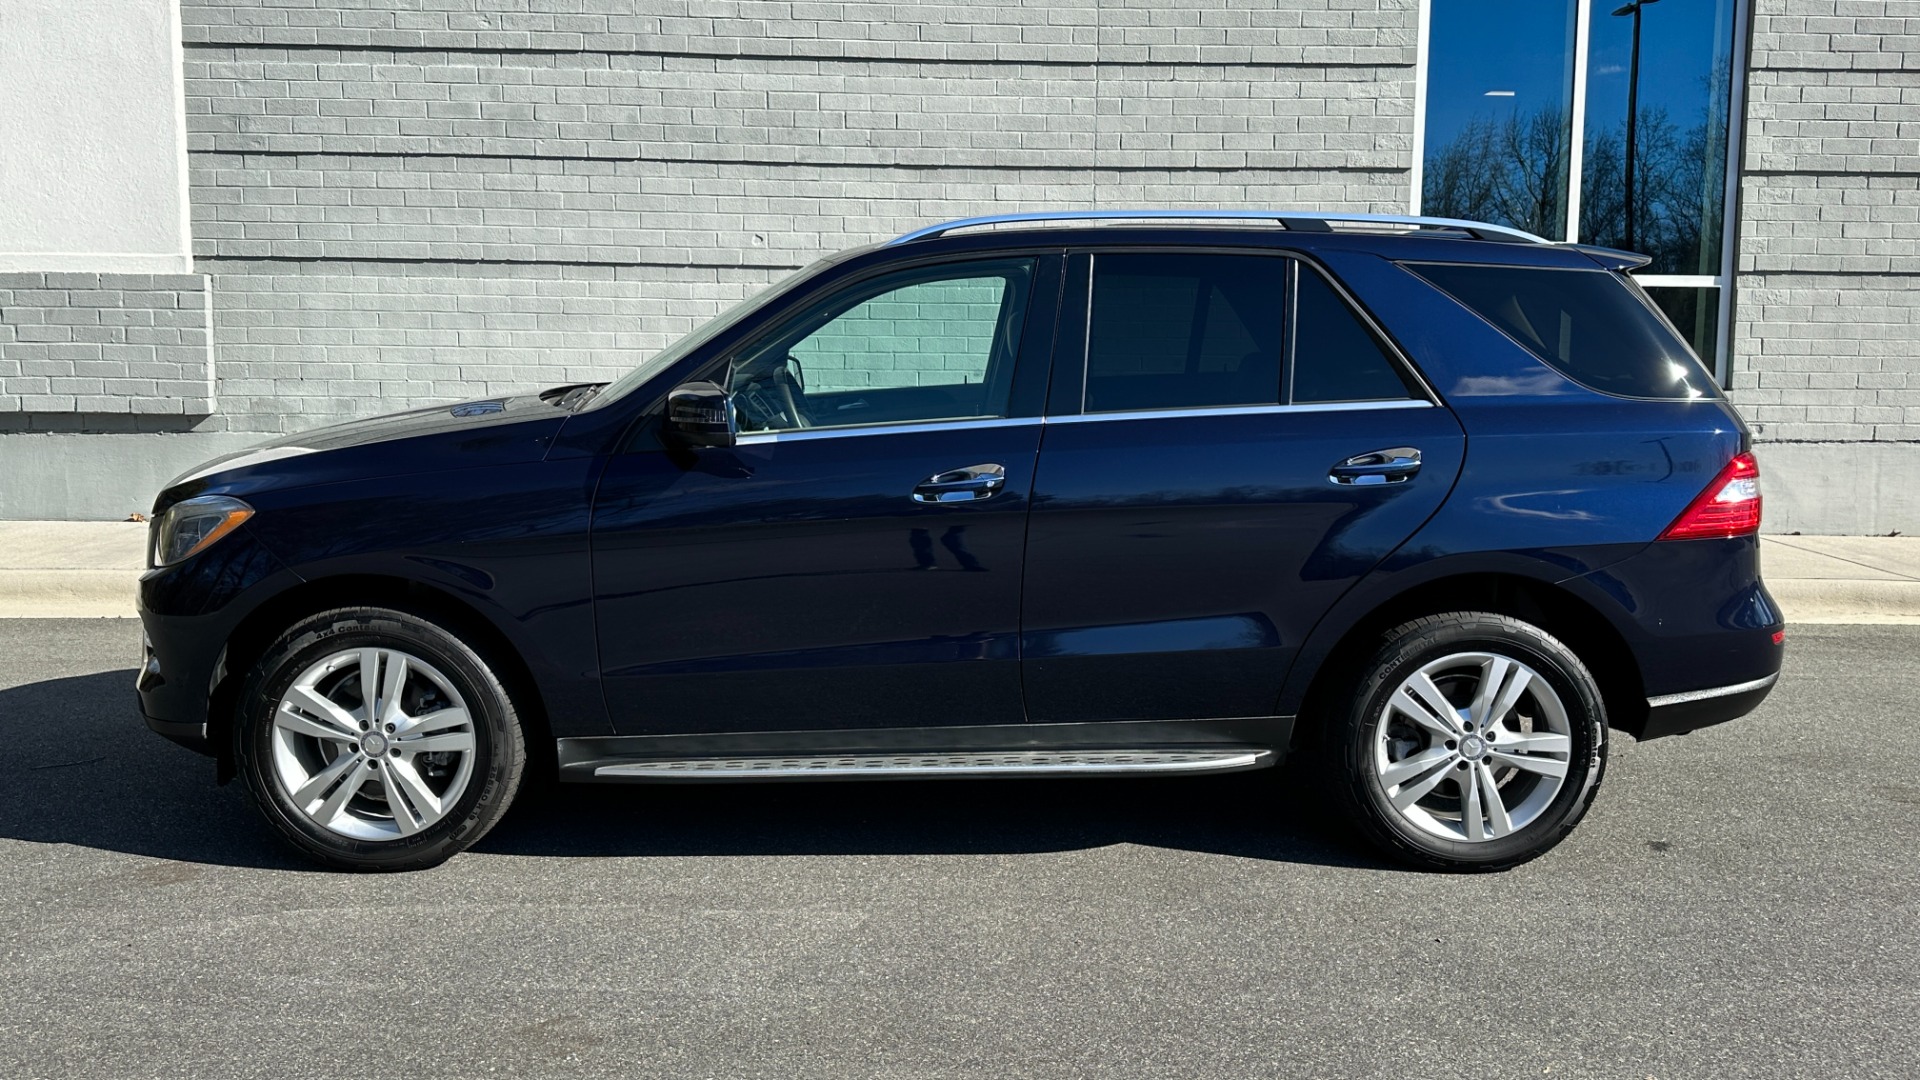 Used 2015 Mercedes-Benz M-Class ML350 AWD / AMBIENT LIGHTING / HK SOUND / PREMIUM PKG / LANE TRACKING for sale $21,995 at Formula Imports in Charlotte NC 28227 3